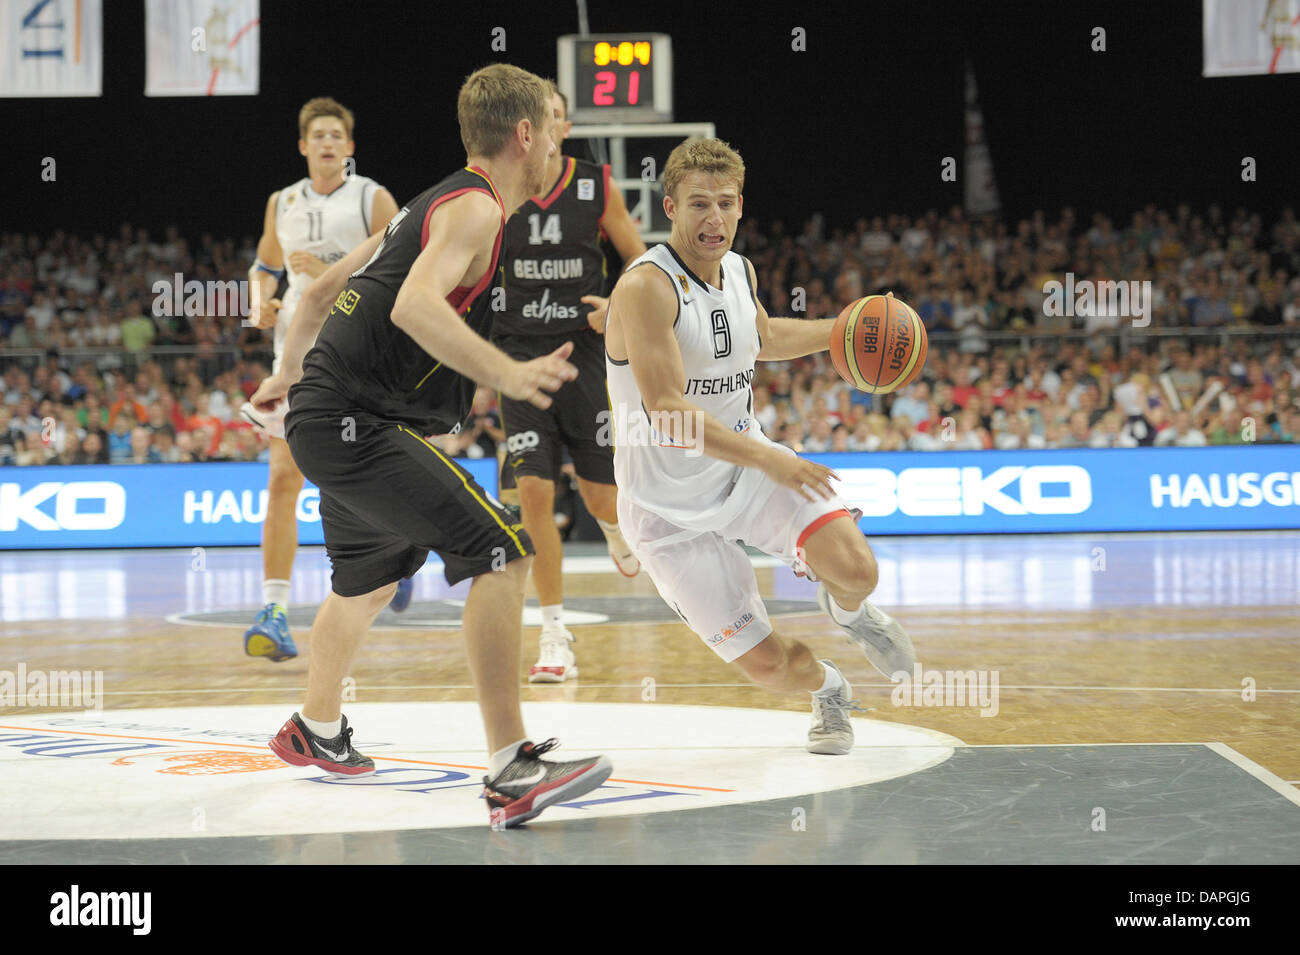 German basketball player Dirk Nowitzki in action during the Basketball  Supercup 2011 match between Germany and